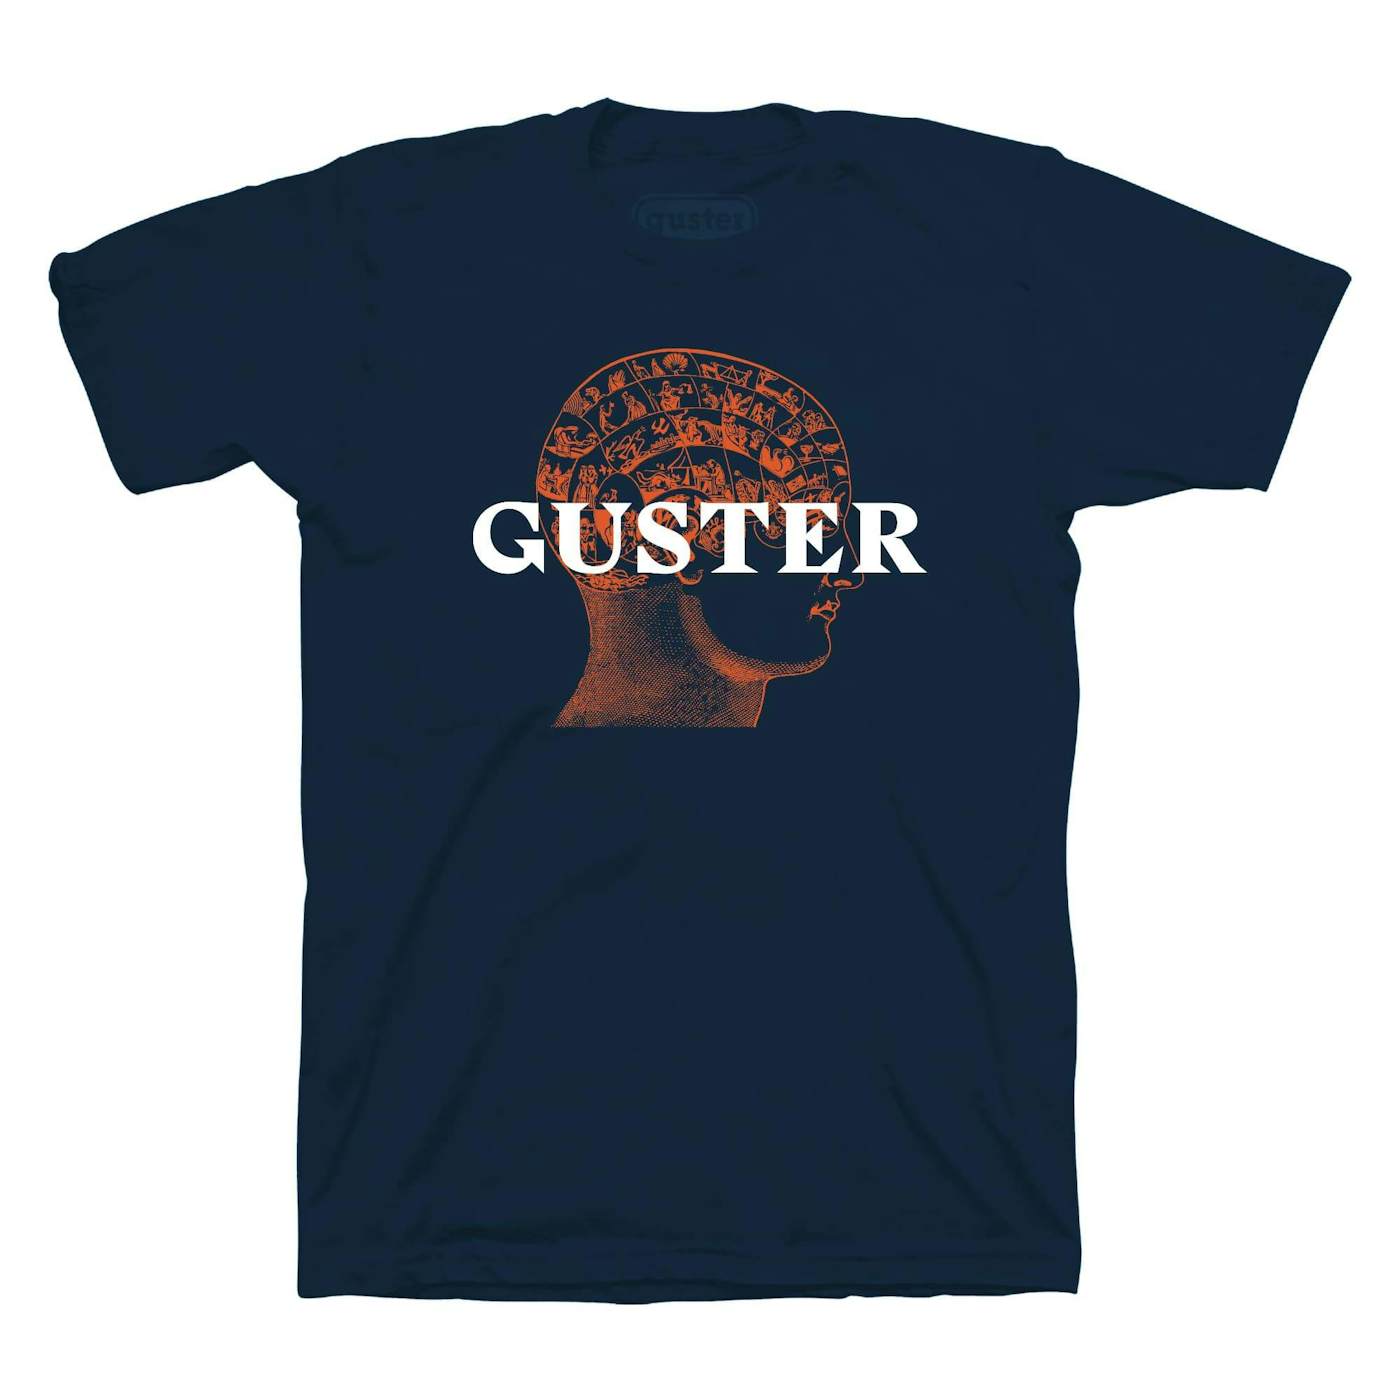 Guster 'Music & Improv' Acoustic Tour T-Shirt